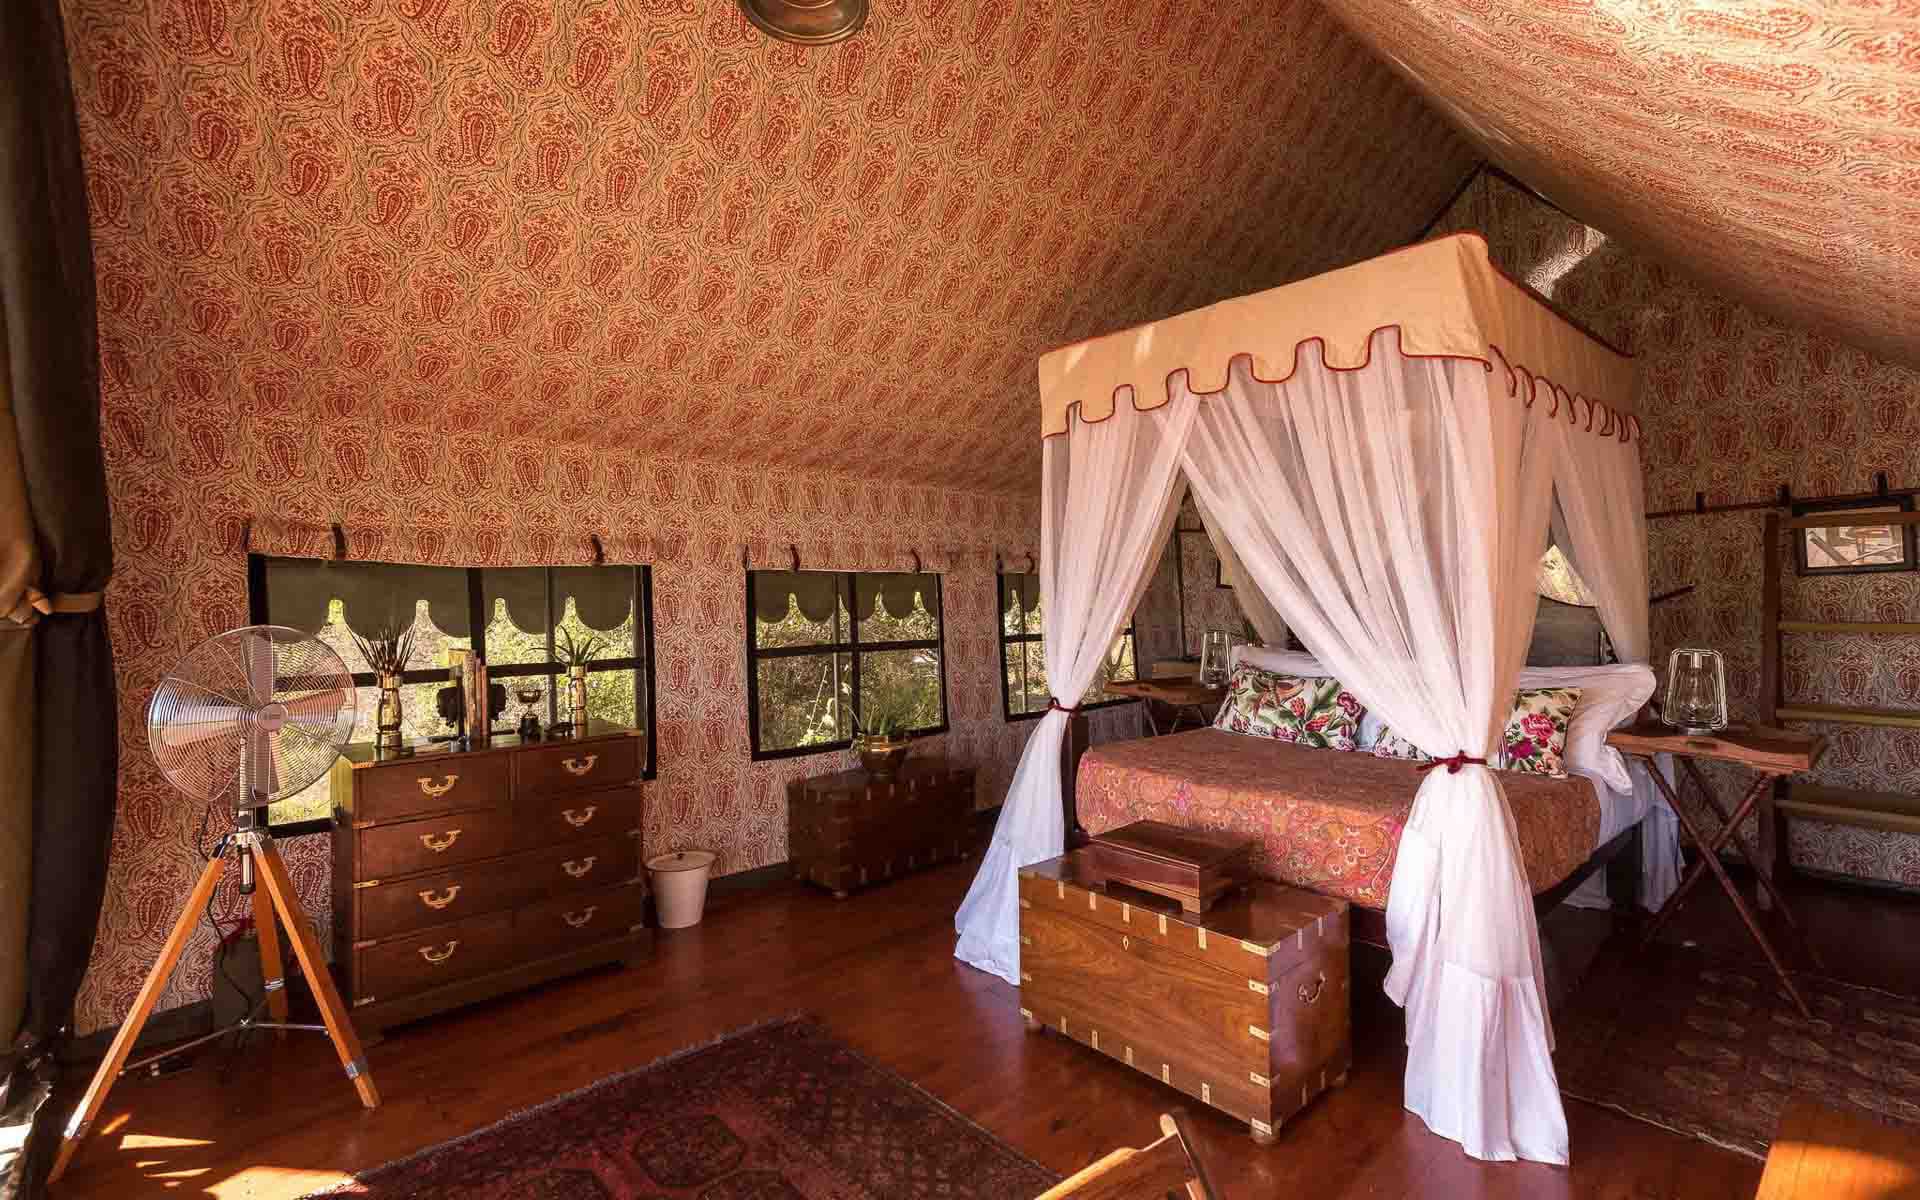 The interior of a luxury double tent with an antique 4 poster bed frame at Duke’s Camp